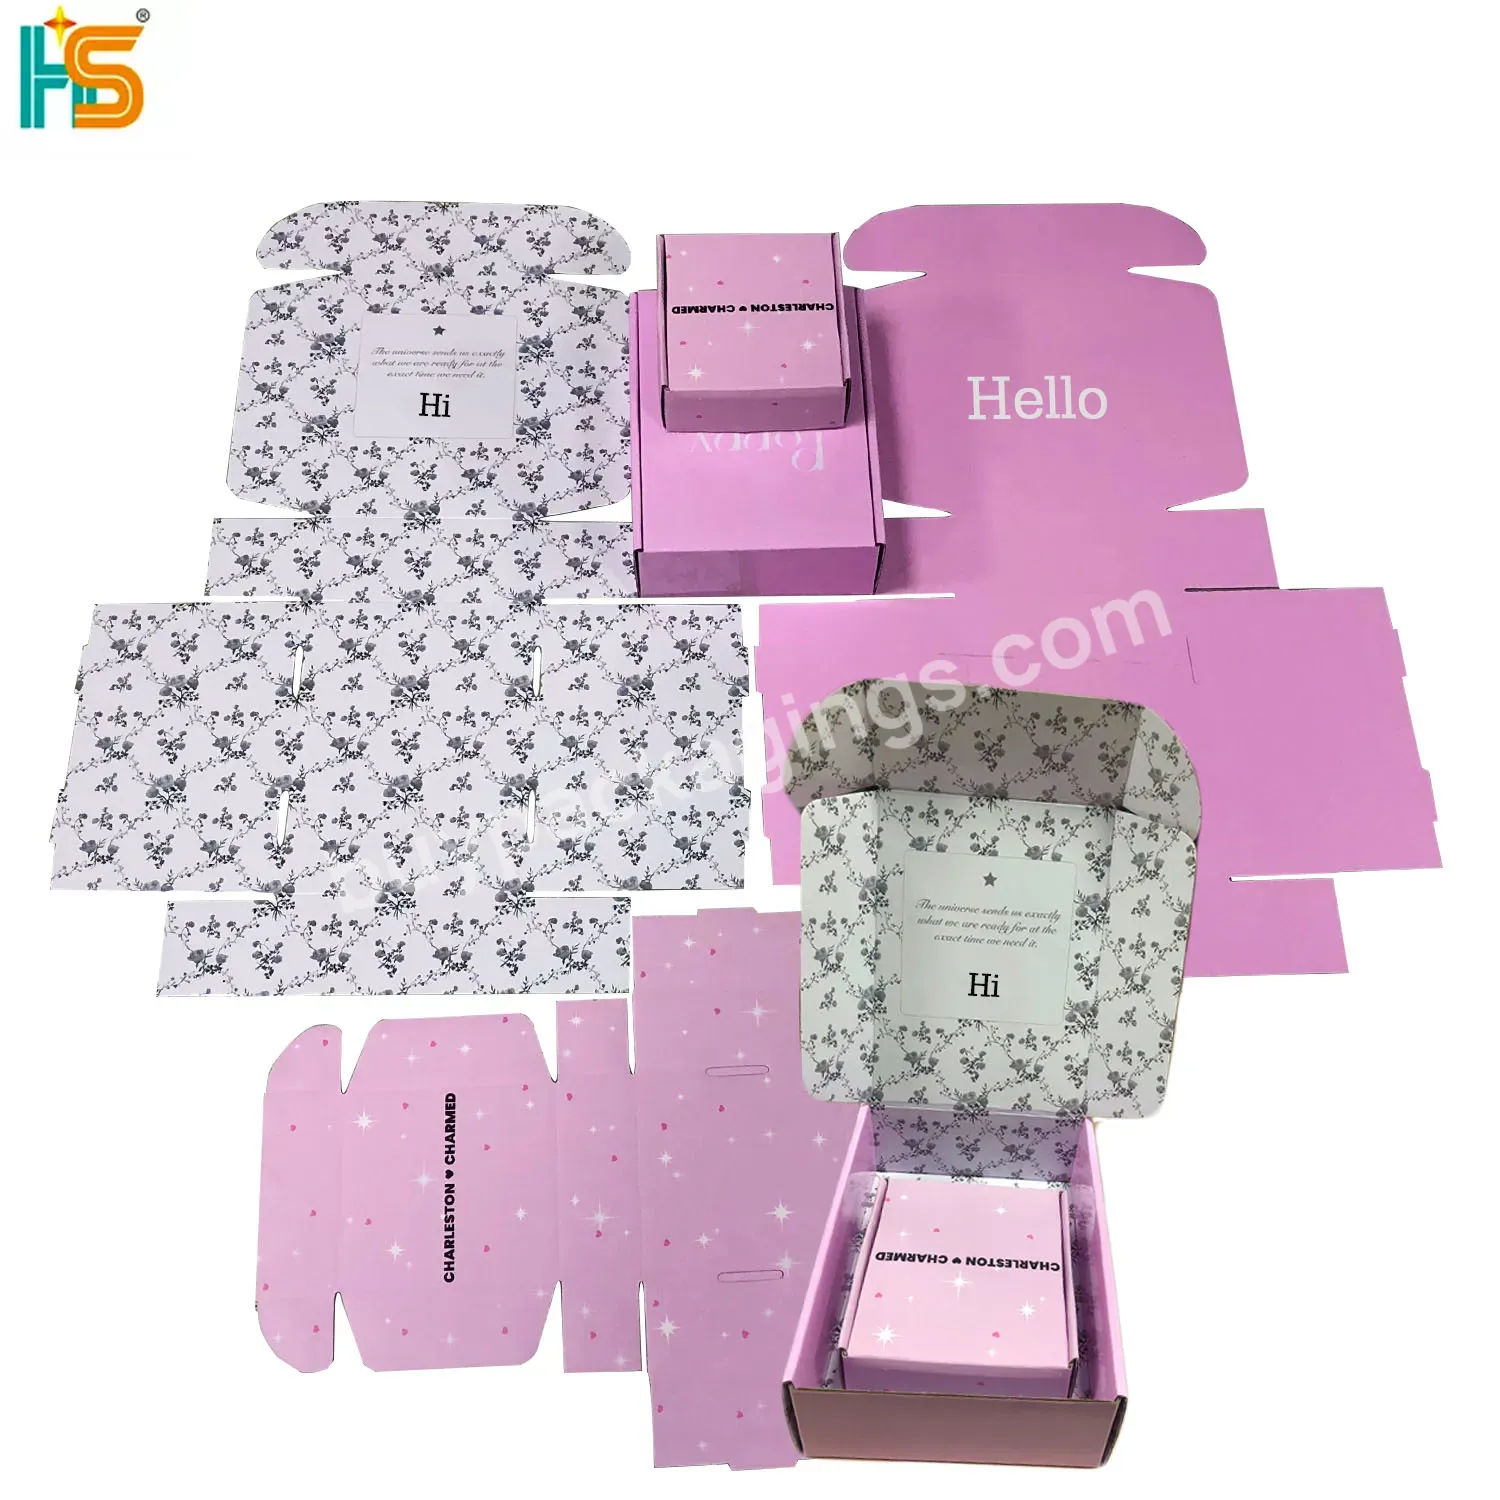 Corrugated Mailer Box Custom Printed Logo Small Pink Shipping Packaging Boxes For Small Business